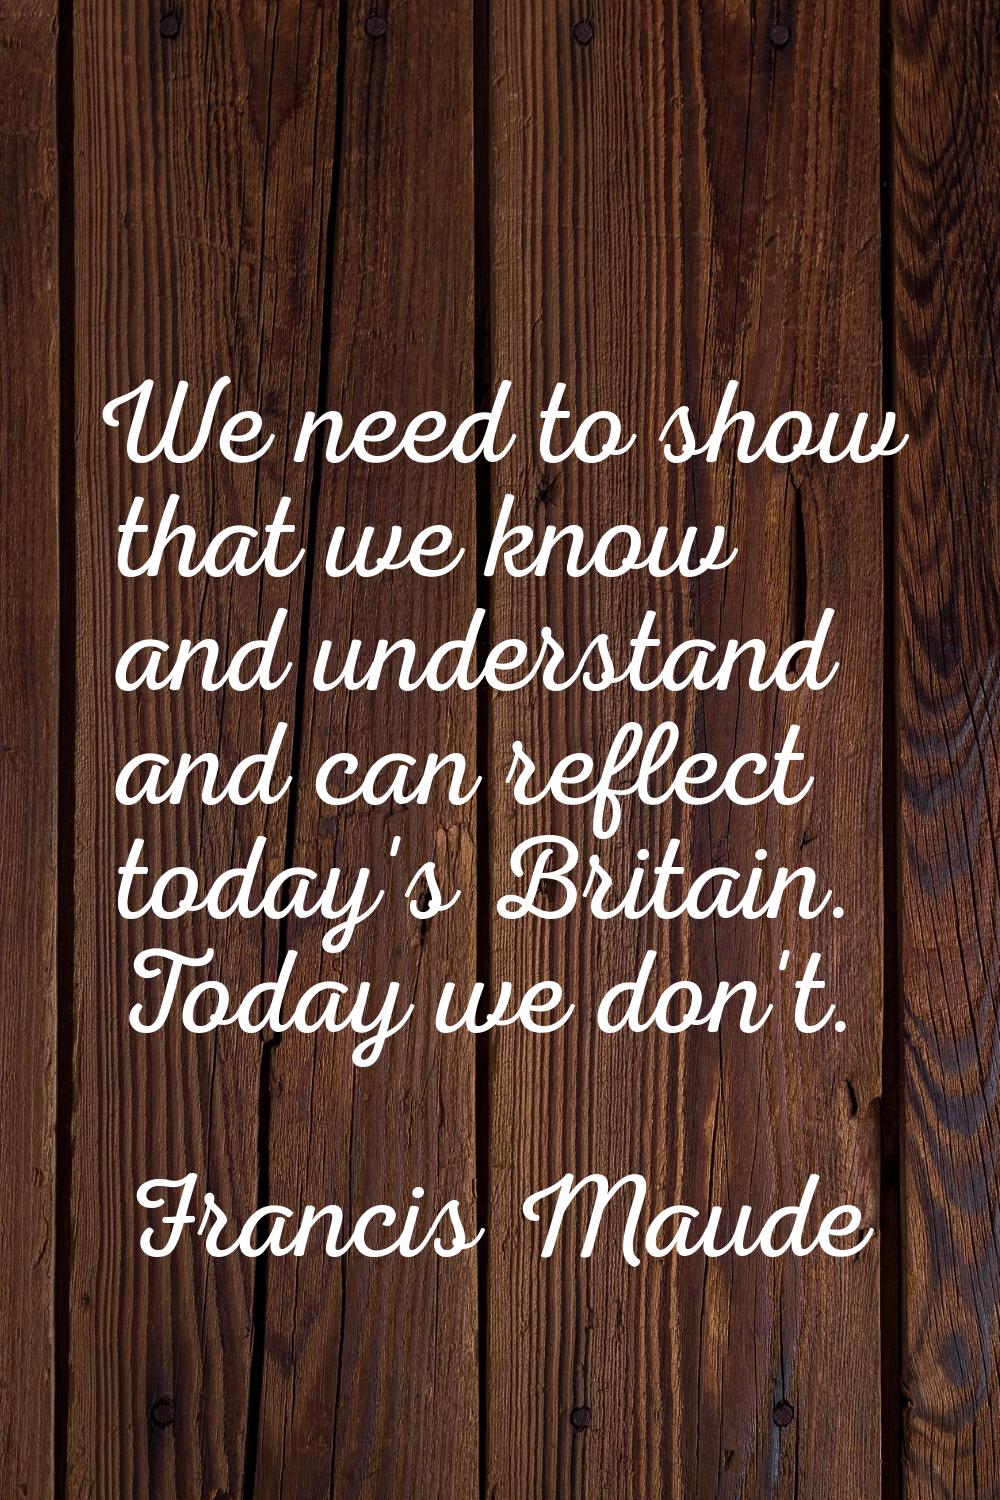 We need to show that we know and understand and can reflect today's Britain. Today we don't.